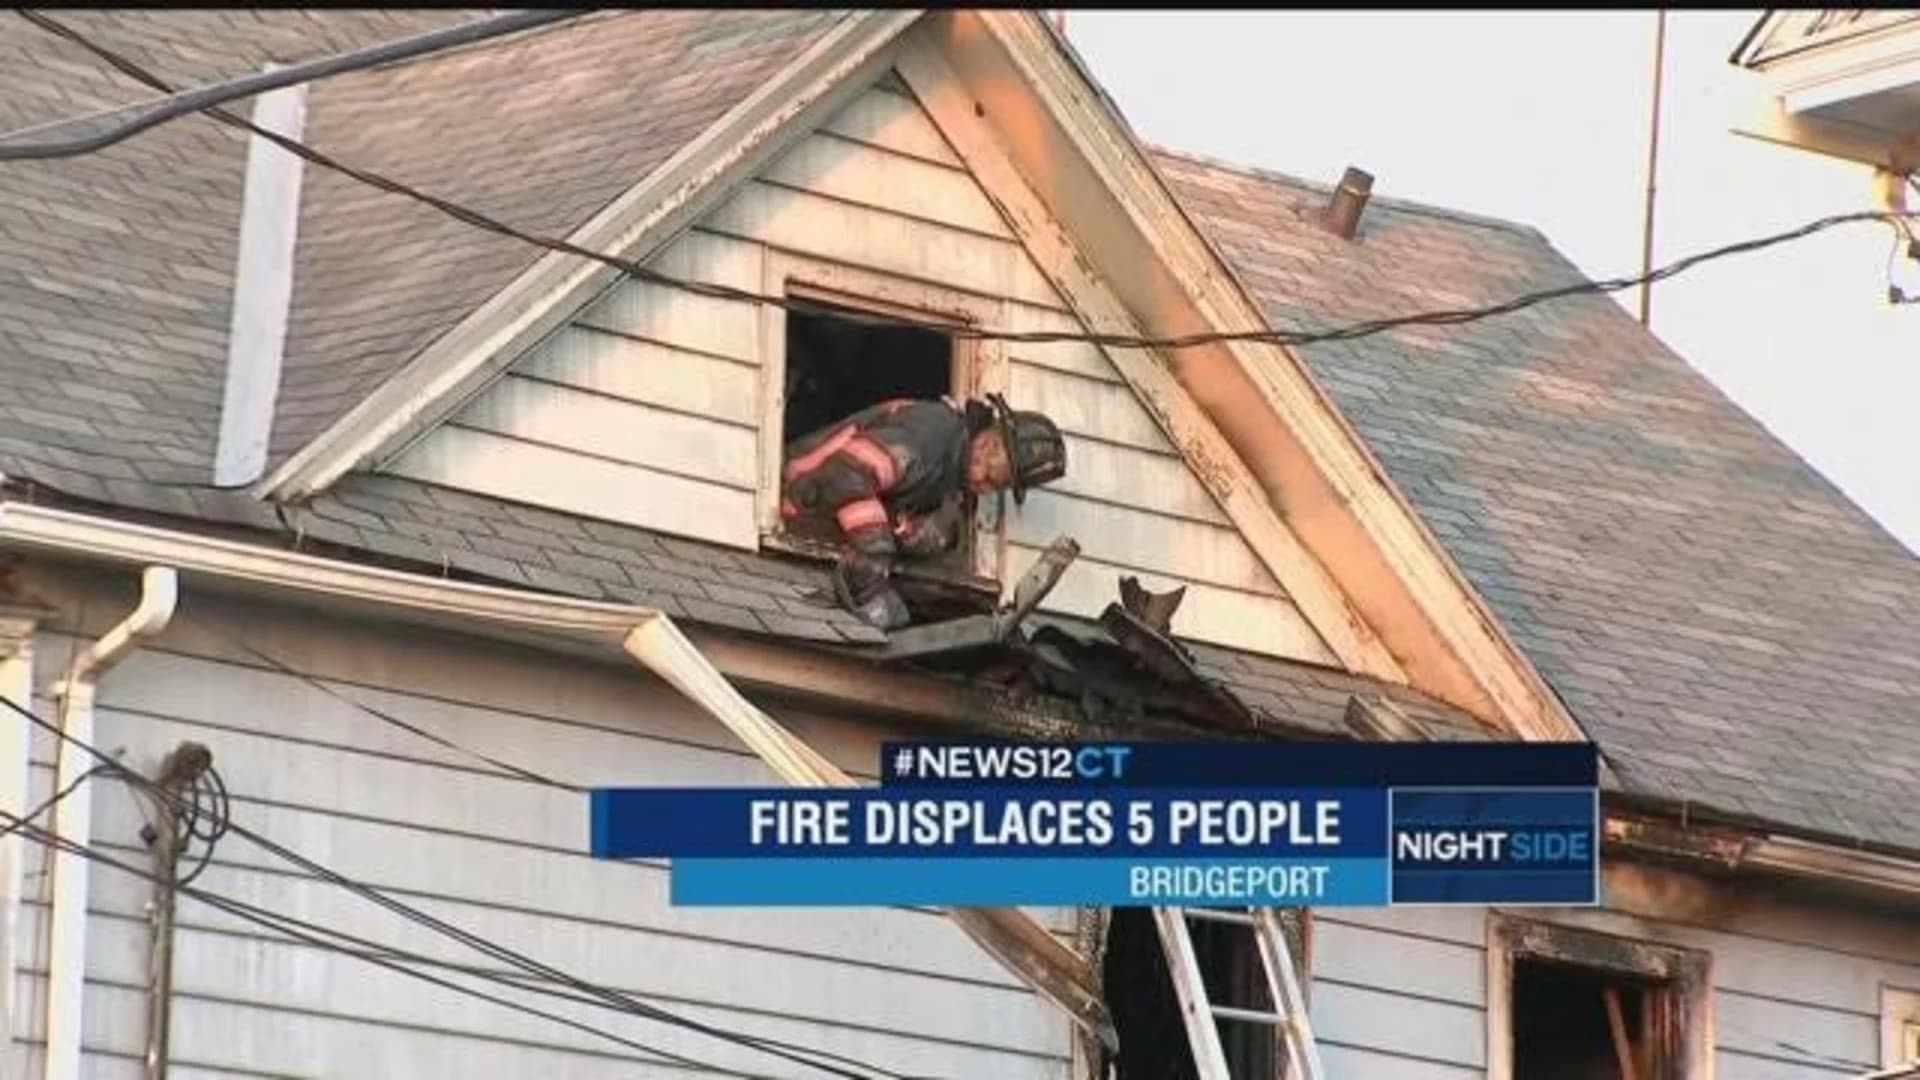 Officials: 5 displaced, pets killed in Bridgeport house fire